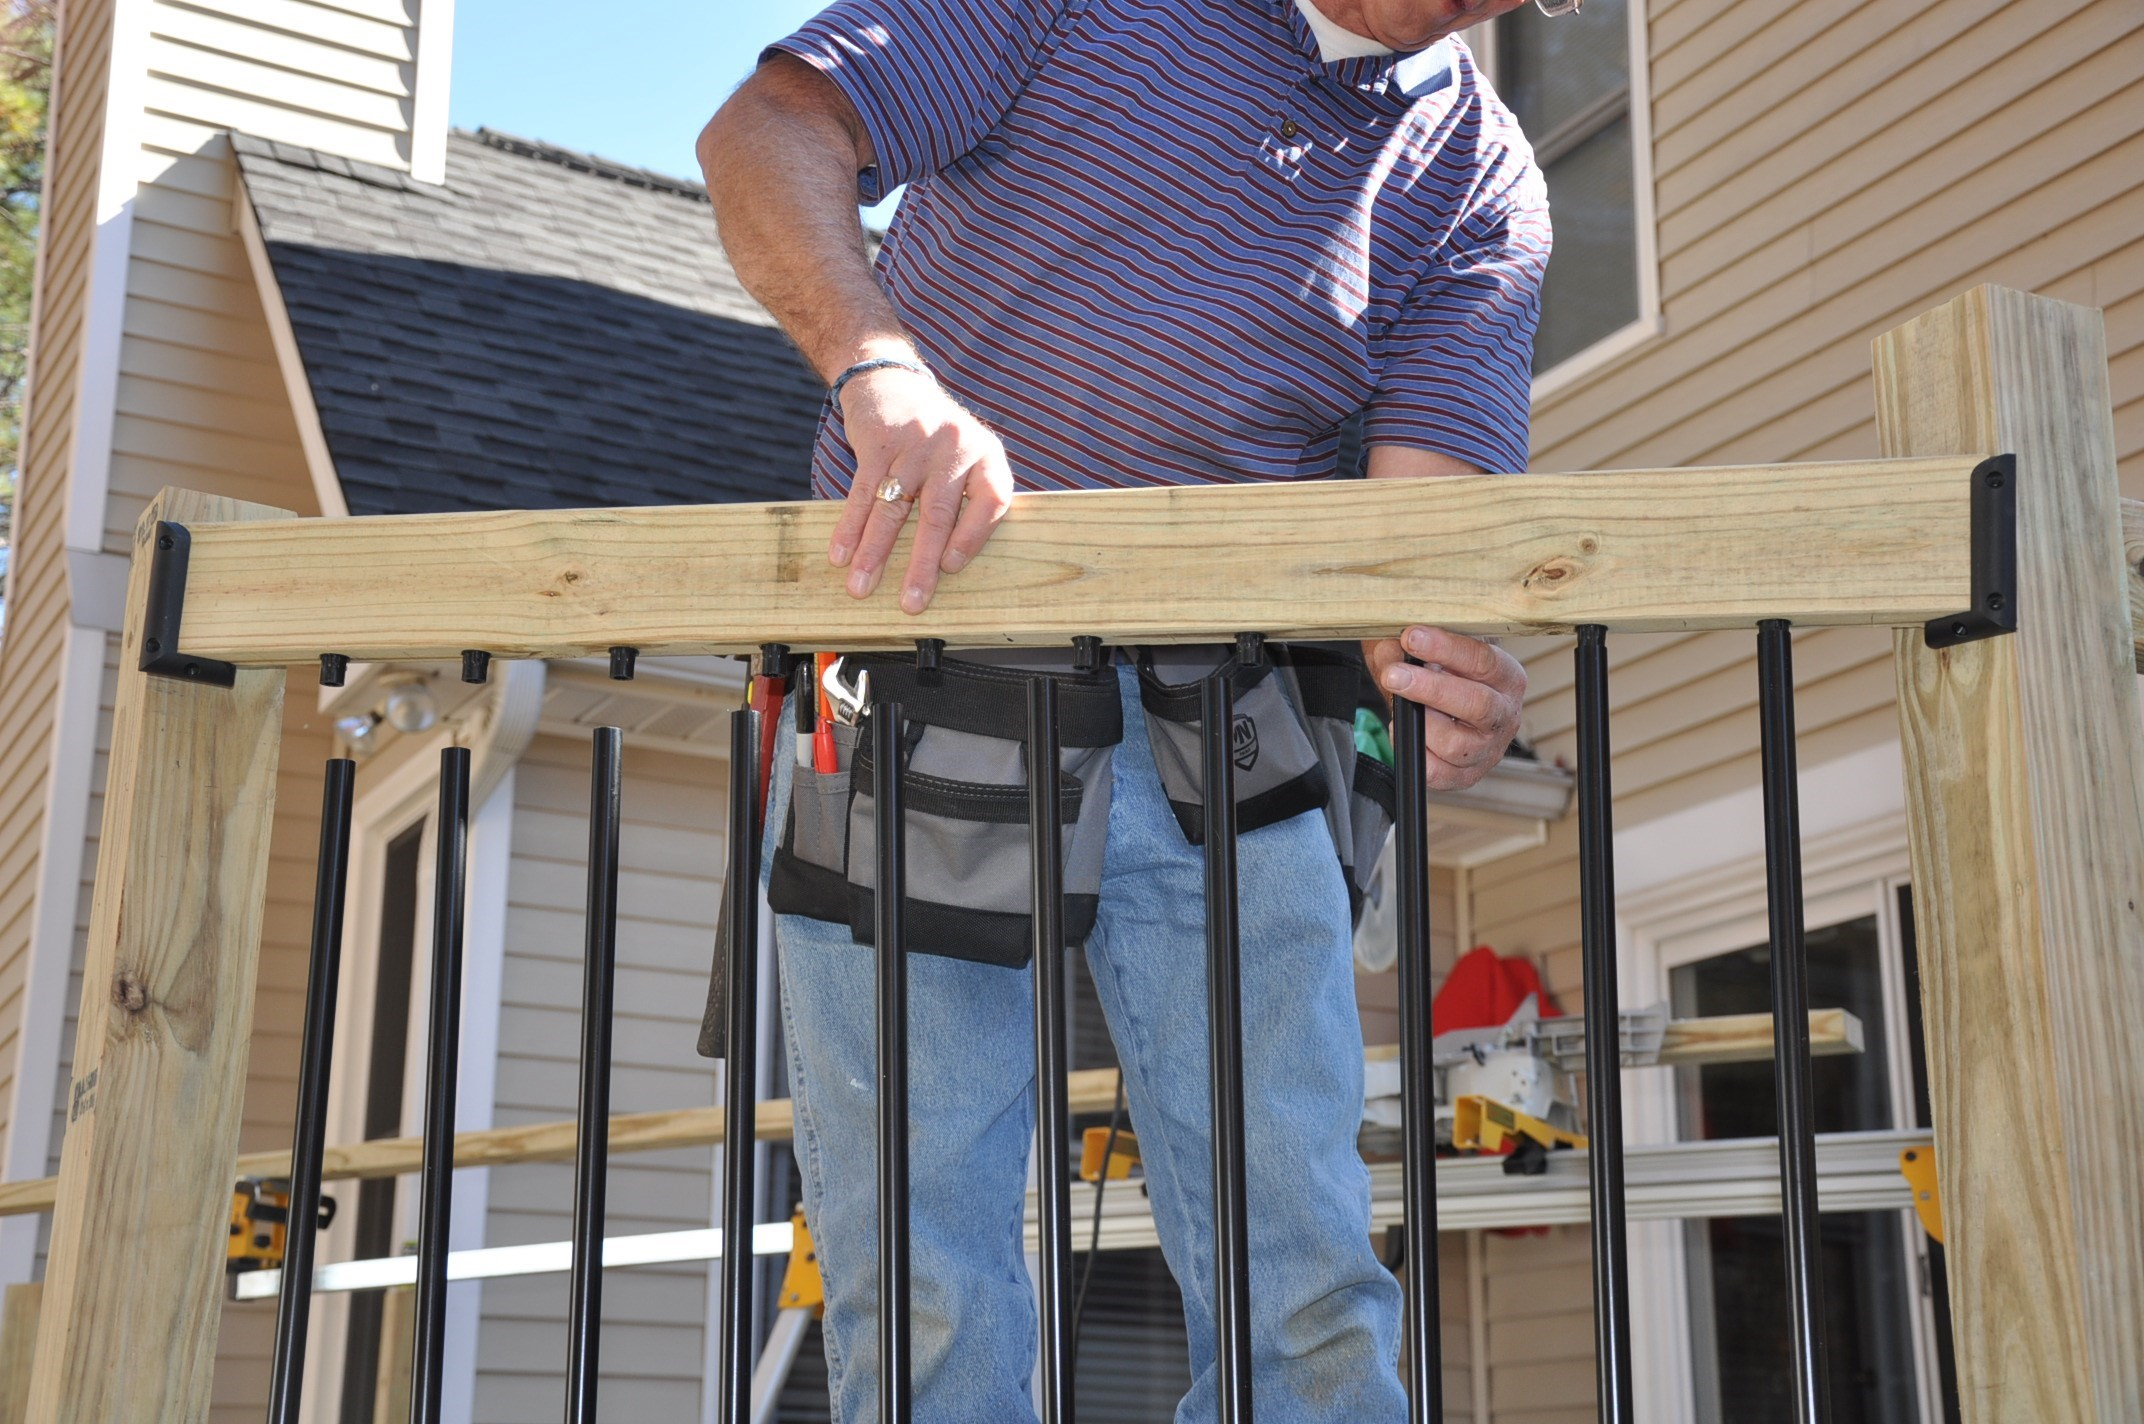 How To Build Deck Stair Railing With Metal Balusters